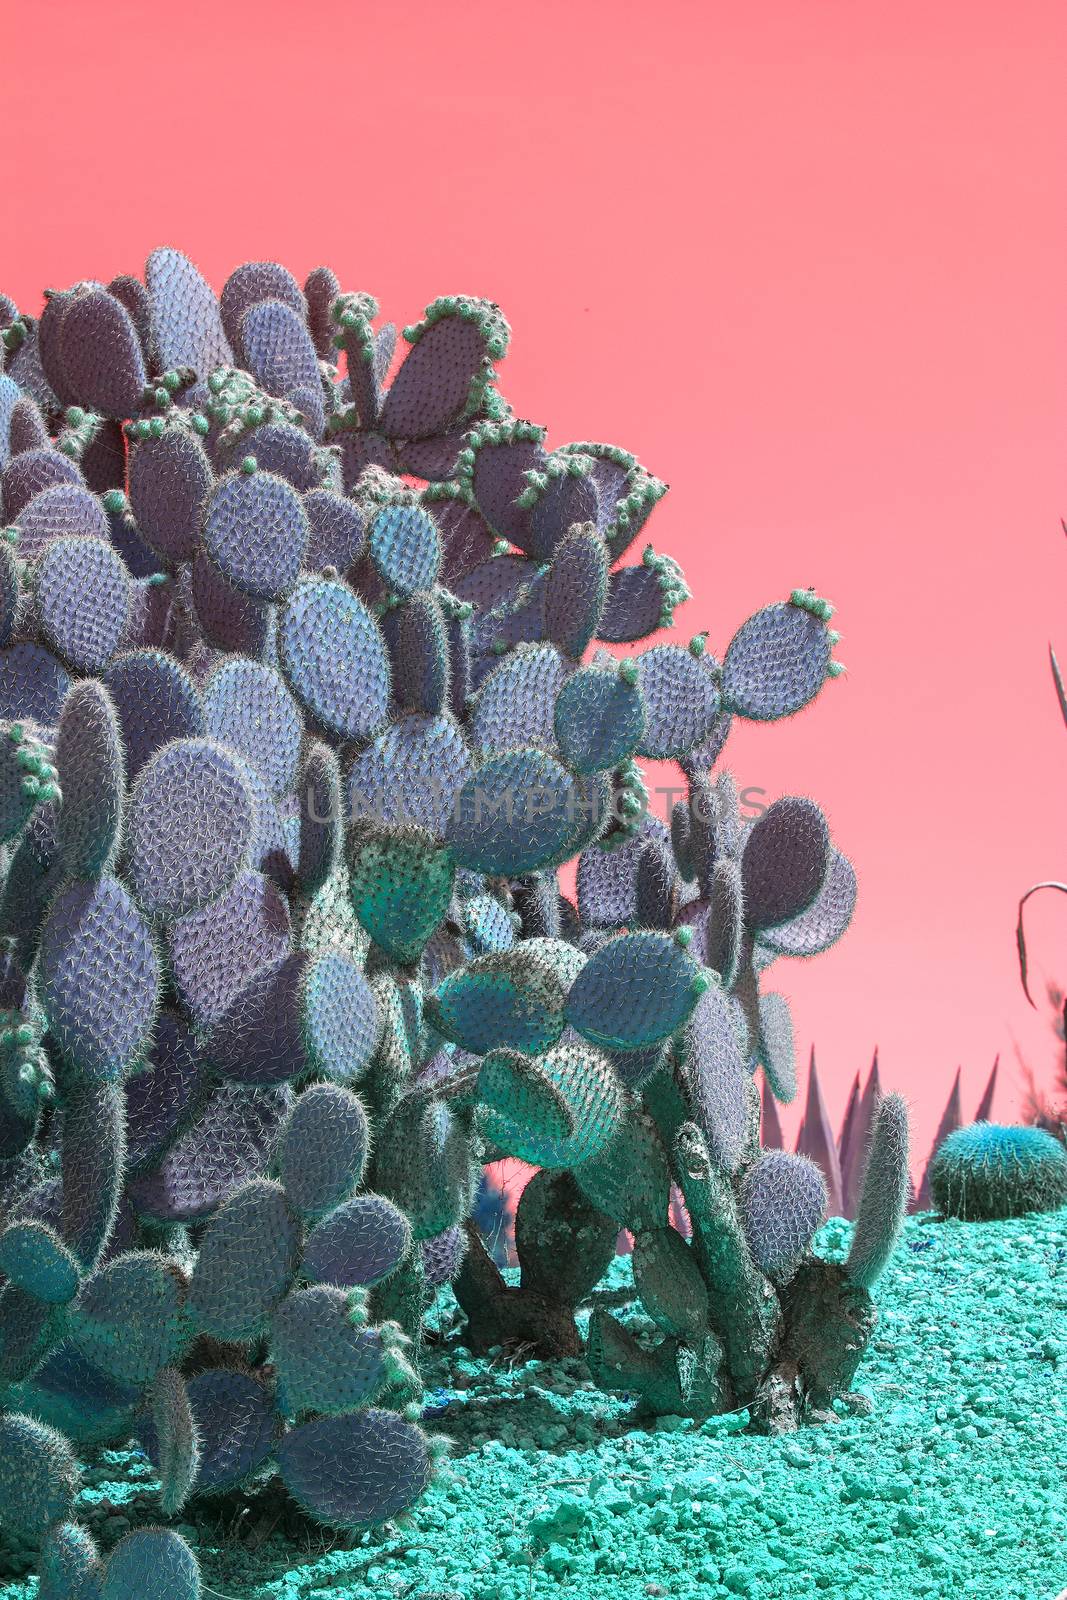 Surrealistic abstract cactus and succulent plants in arid landscape with pink red sky